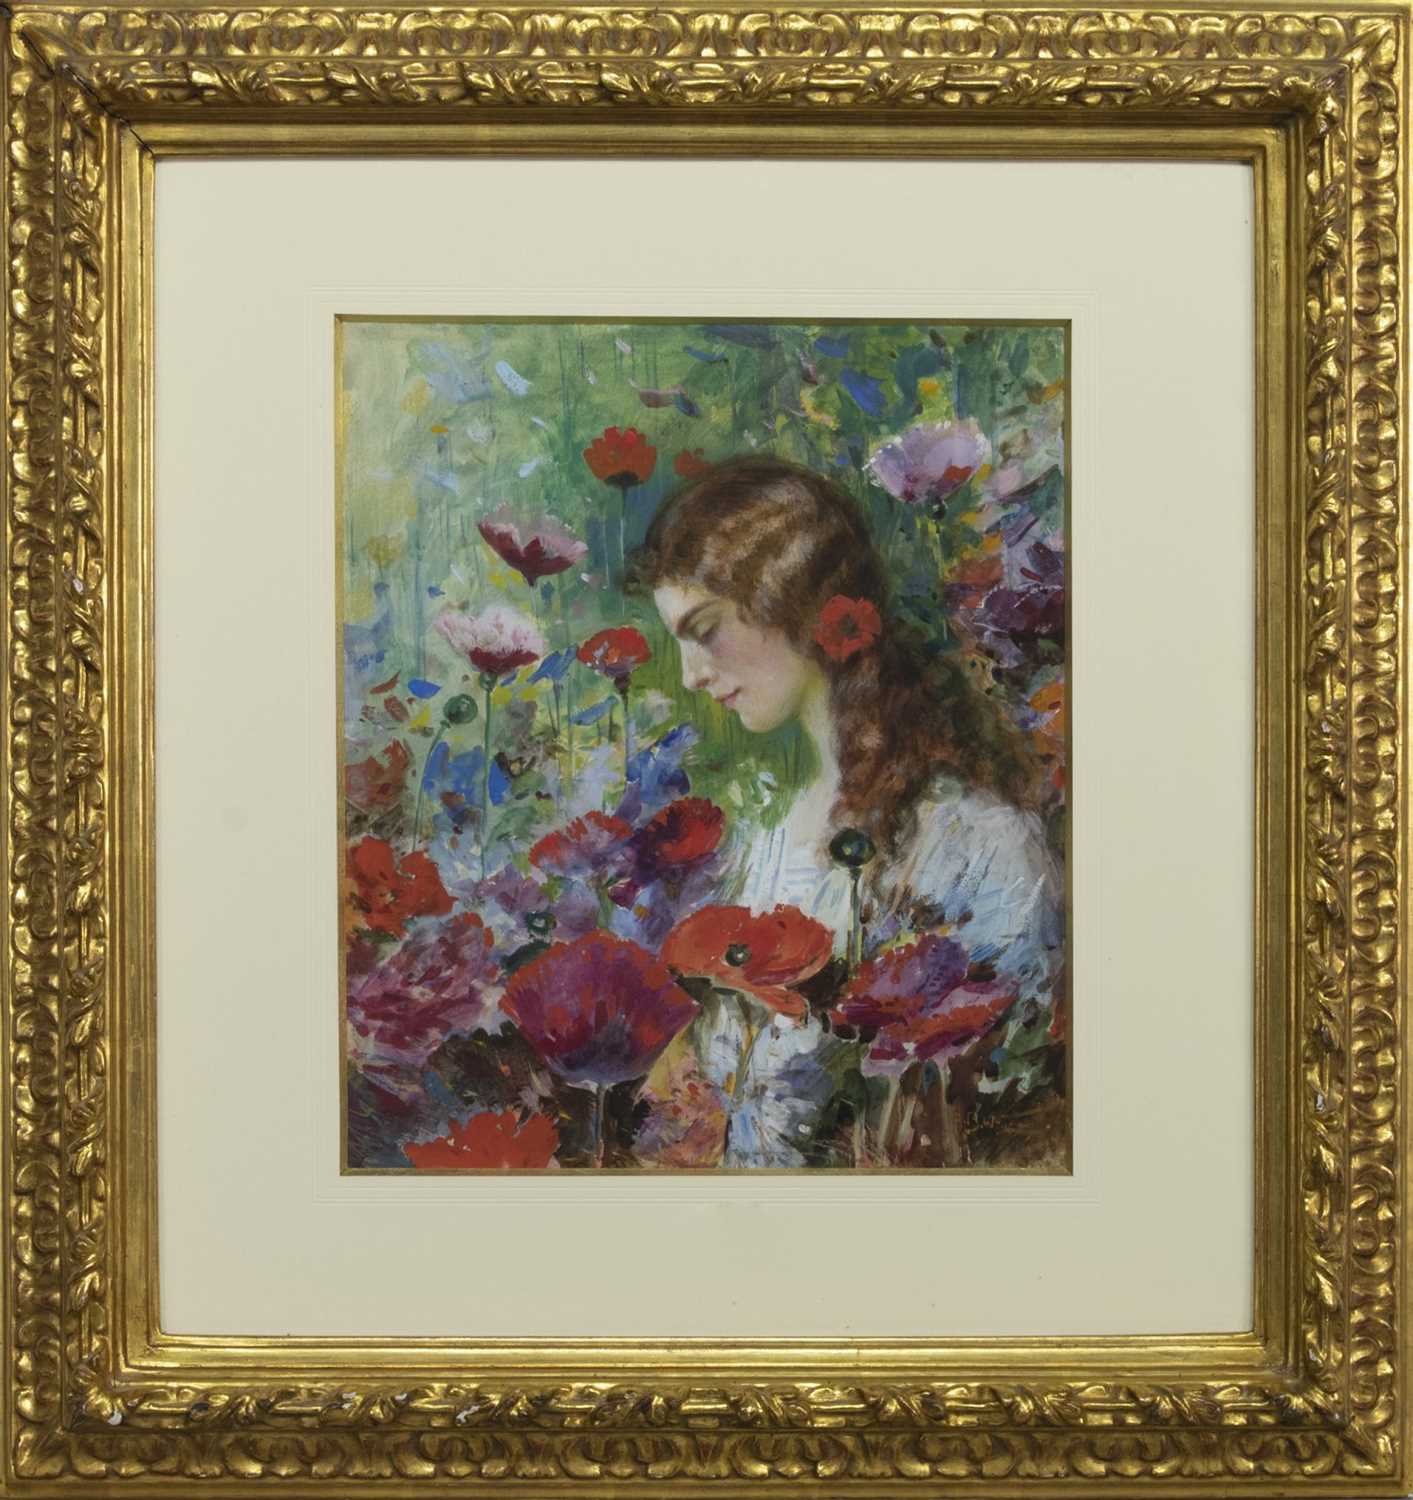 Lot 324 - GIRL AMONG THE FLOWERS, A WATERCOLOUR BY A B WHITE